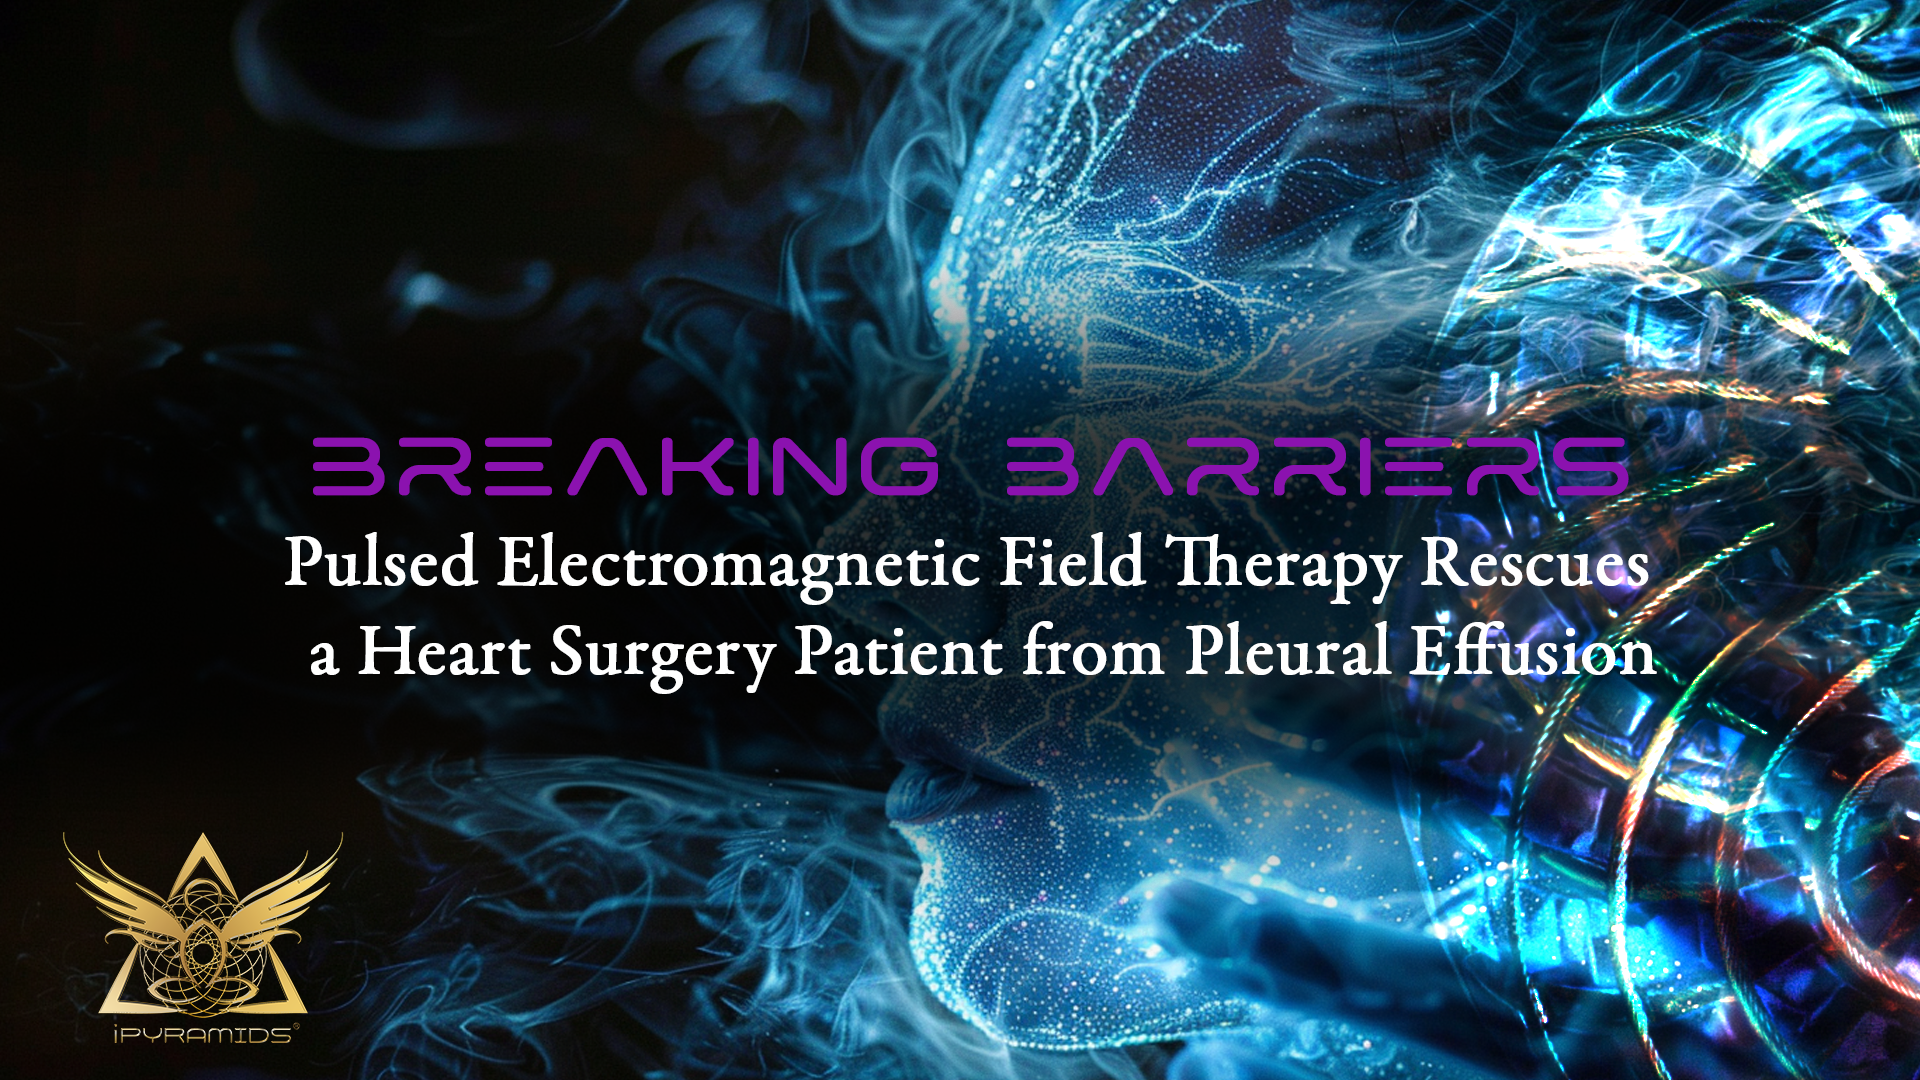 Breaking Barriers: Pulsed Electromagnetic Field Therapy Rescues a Heart Surgery Patient from Pleural Effusion